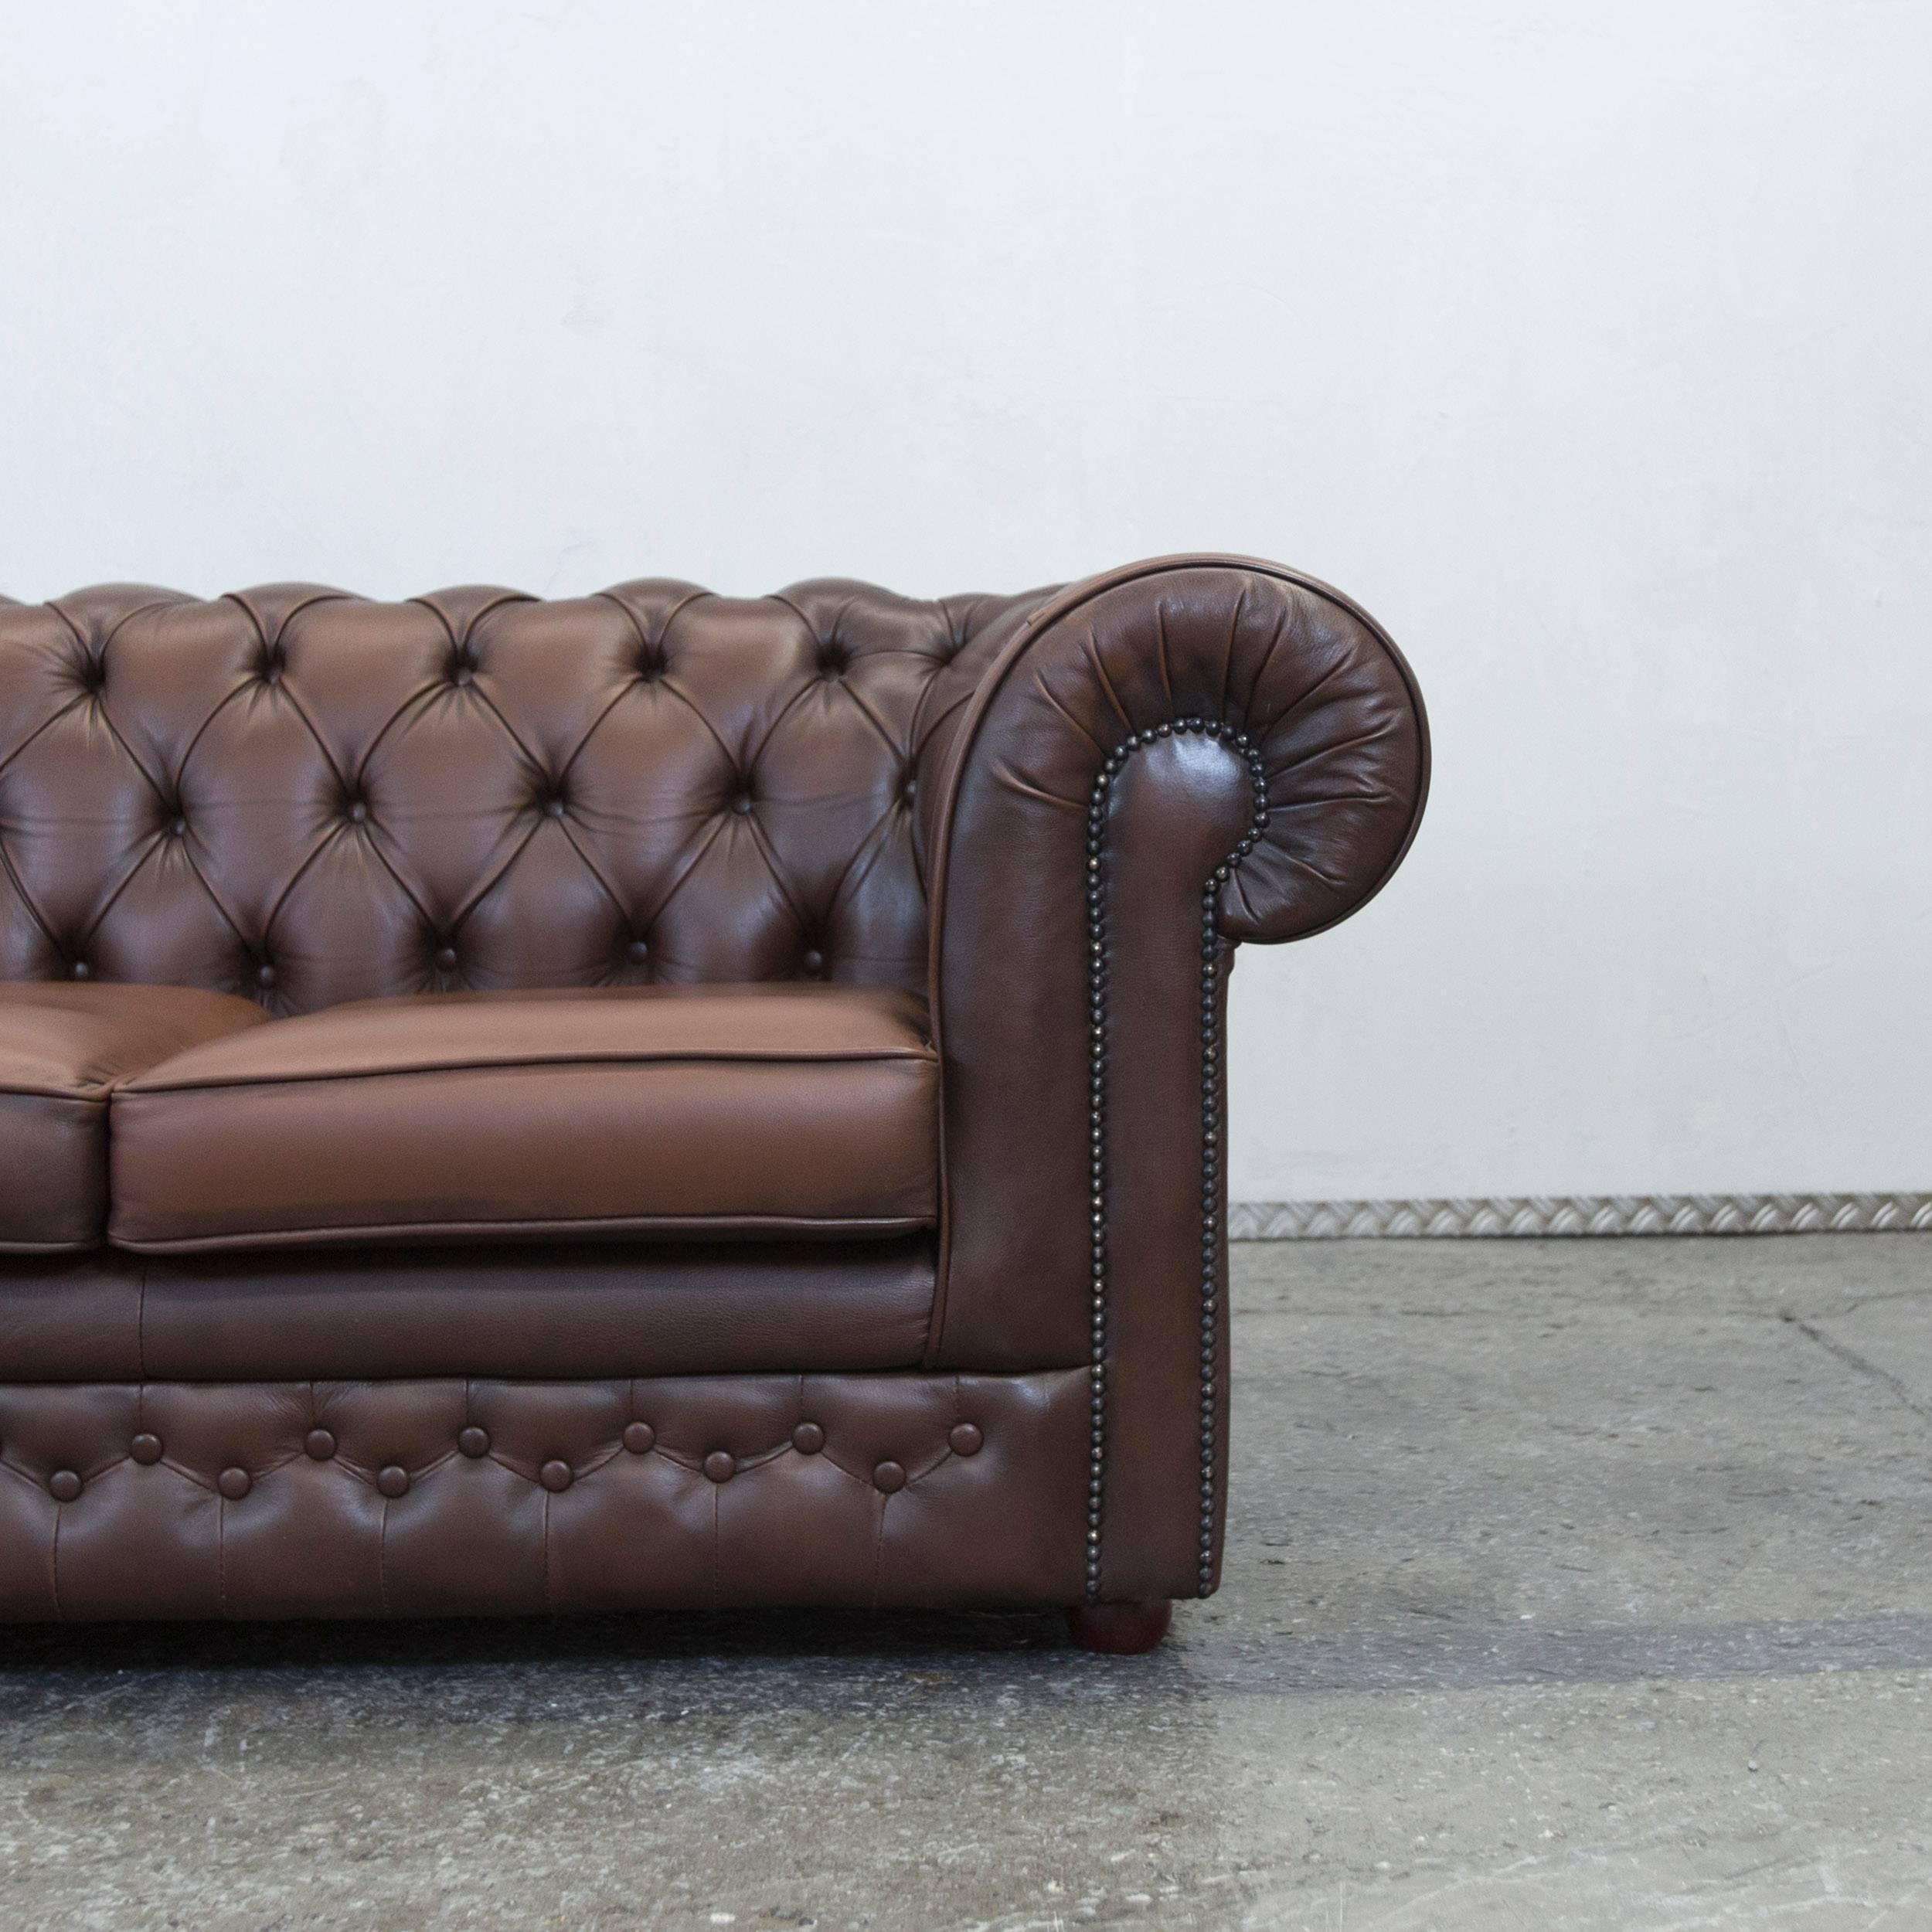 British Thomas Lloyd Chesterfield Leather Sofa Brown Three-Seat Couch Vintage Retro